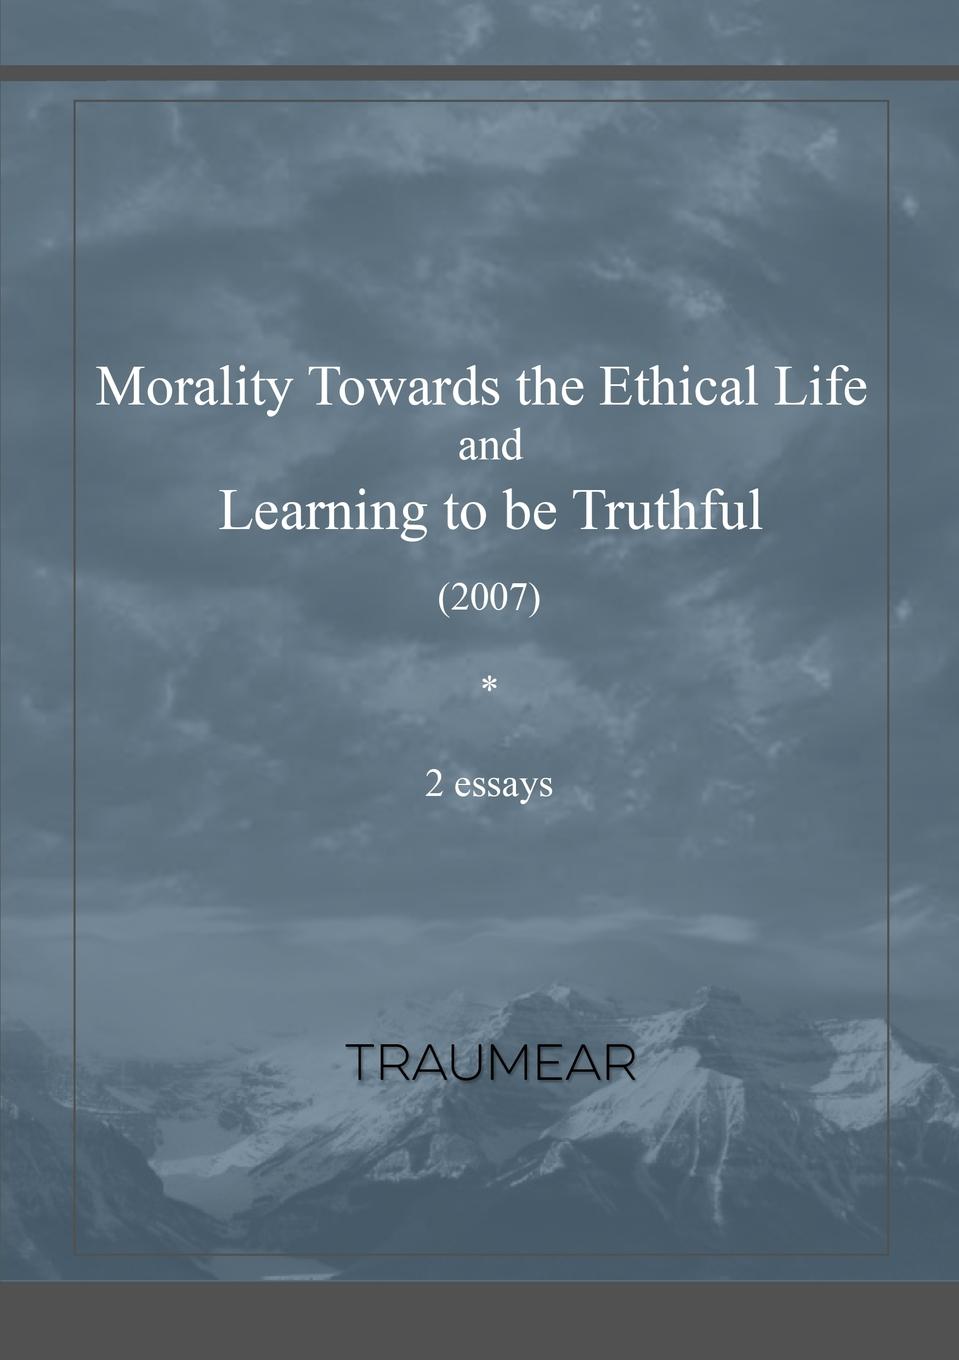 Traumear Morality Towards the Ethical Life . Learning to be Truthful